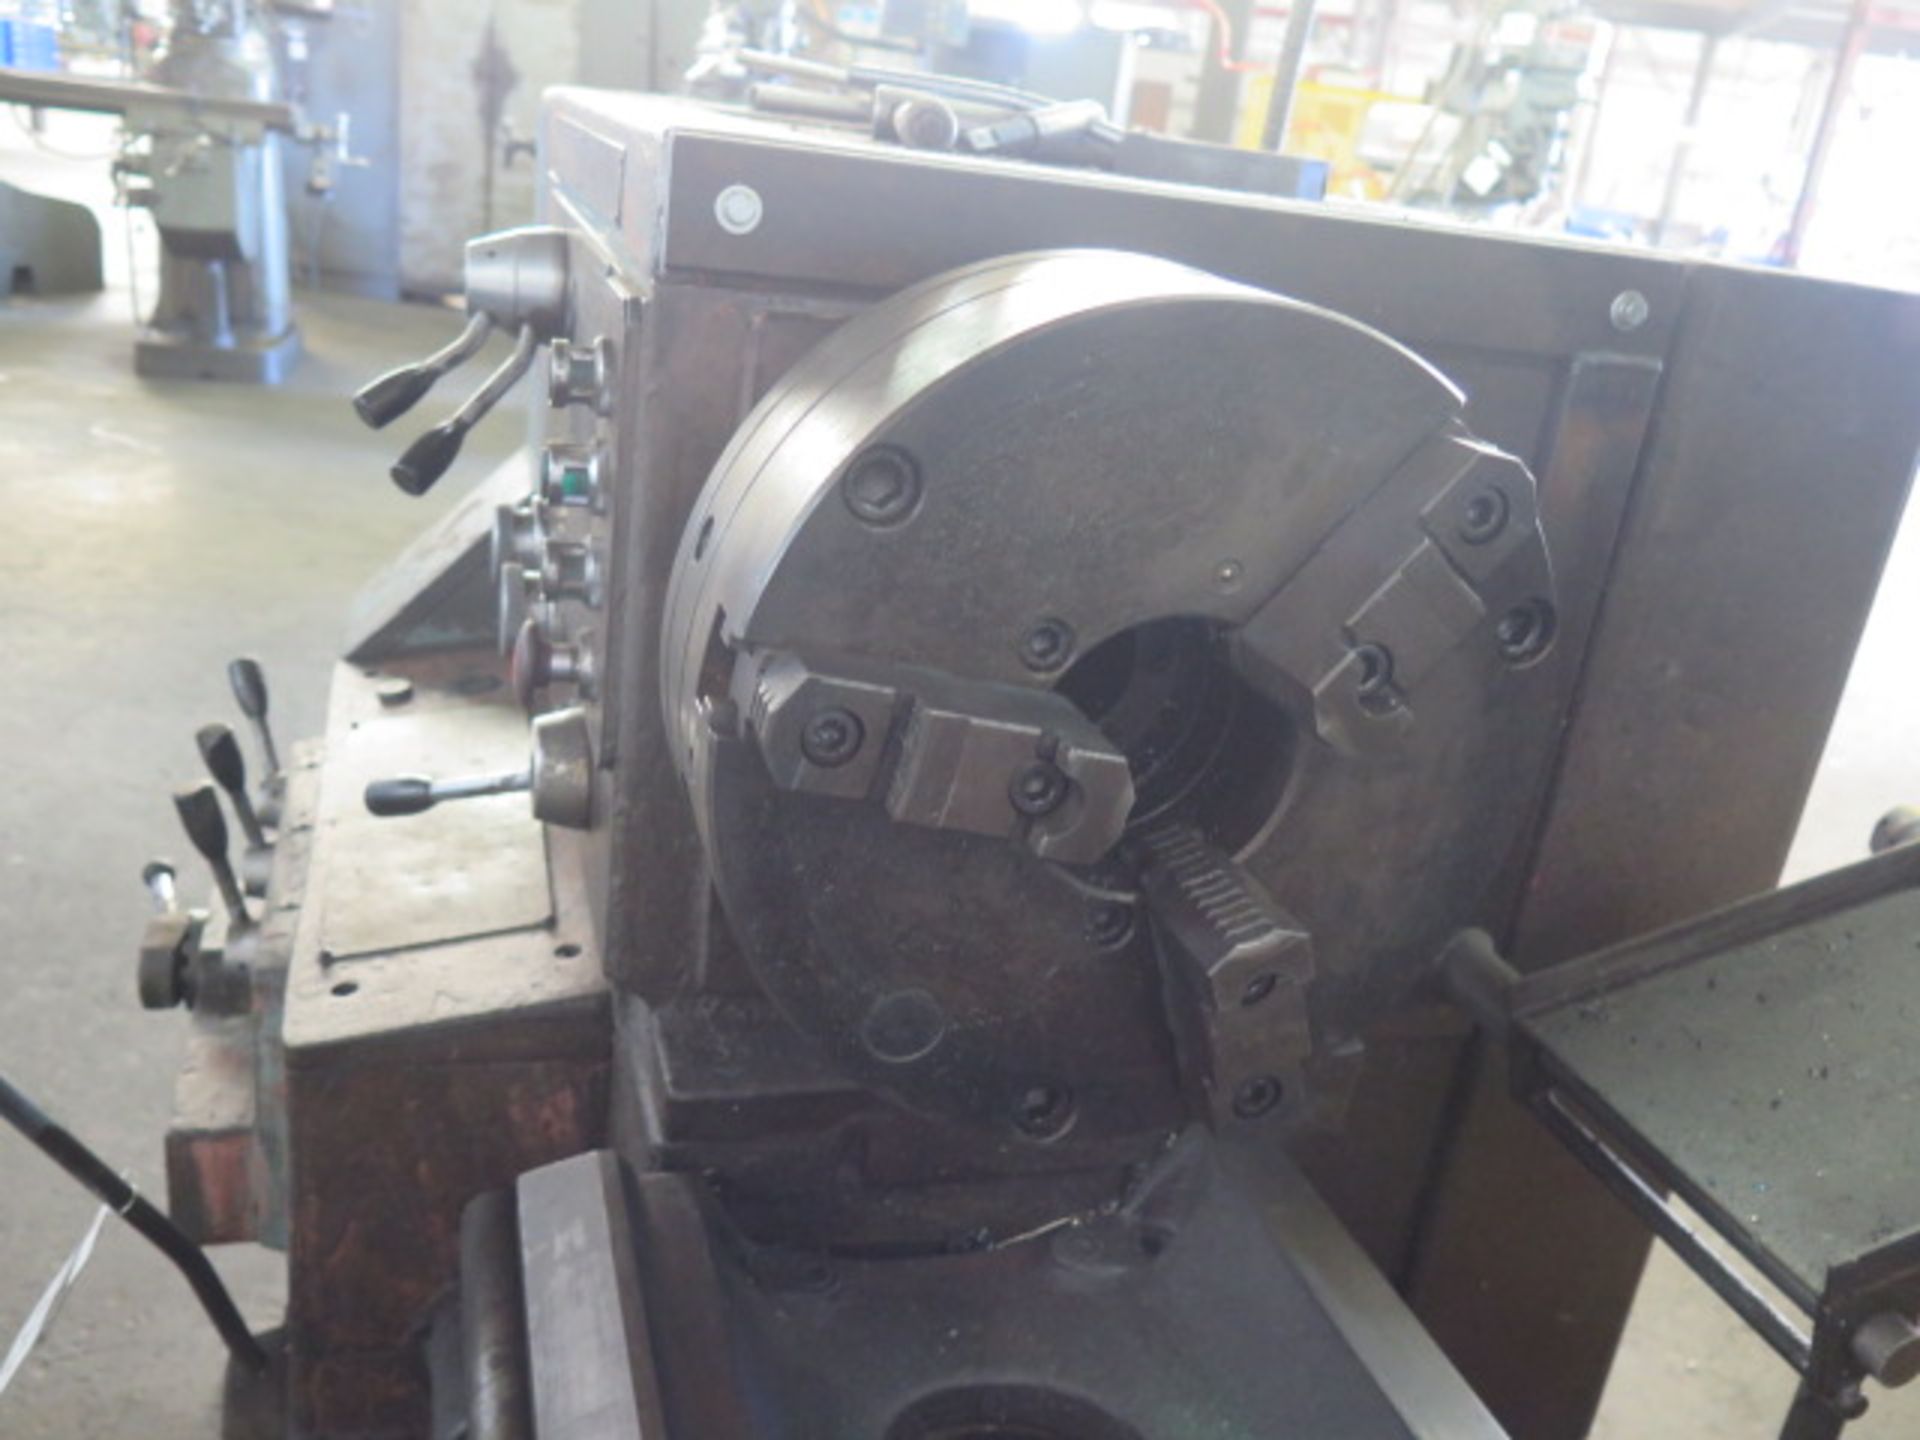 Tarnow TUJ-50 21” x 65” Geared Head Gap Lathe s/n 1300 w/ 71-1800 RPM, Inch/mm Threading, SOLD AS IS - Image 5 of 9